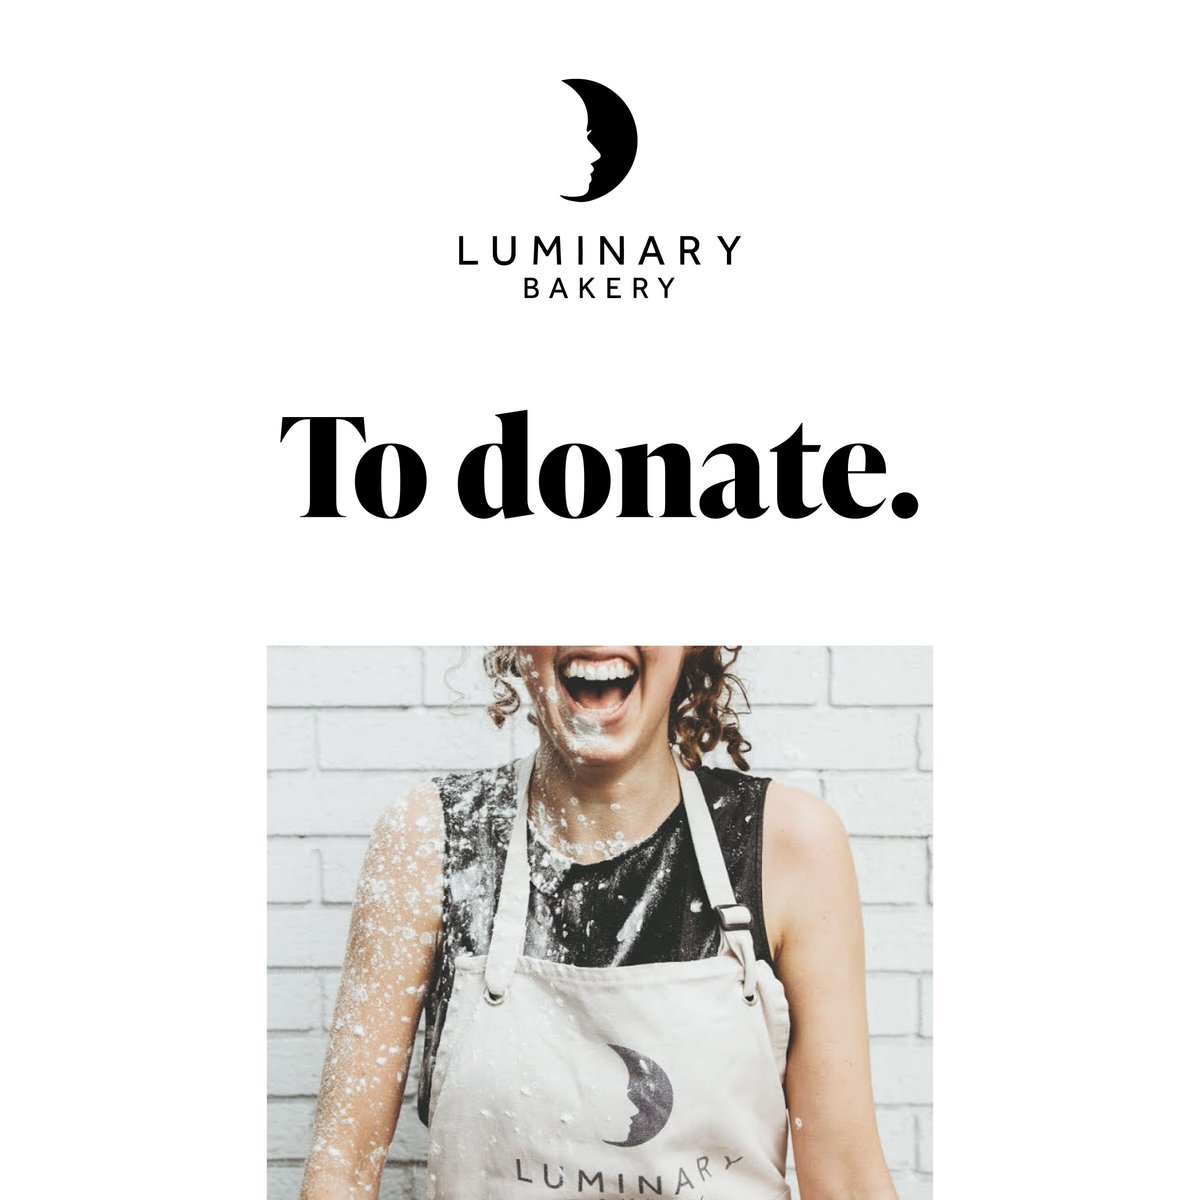 Our crowdfunder ends in 24 HOURS! So you know what that means... It is time to donate! It only takes a minute to help change a life. Donate via the link below to help us reach our goal to empower even more women. buff.ly/3EKoWoW